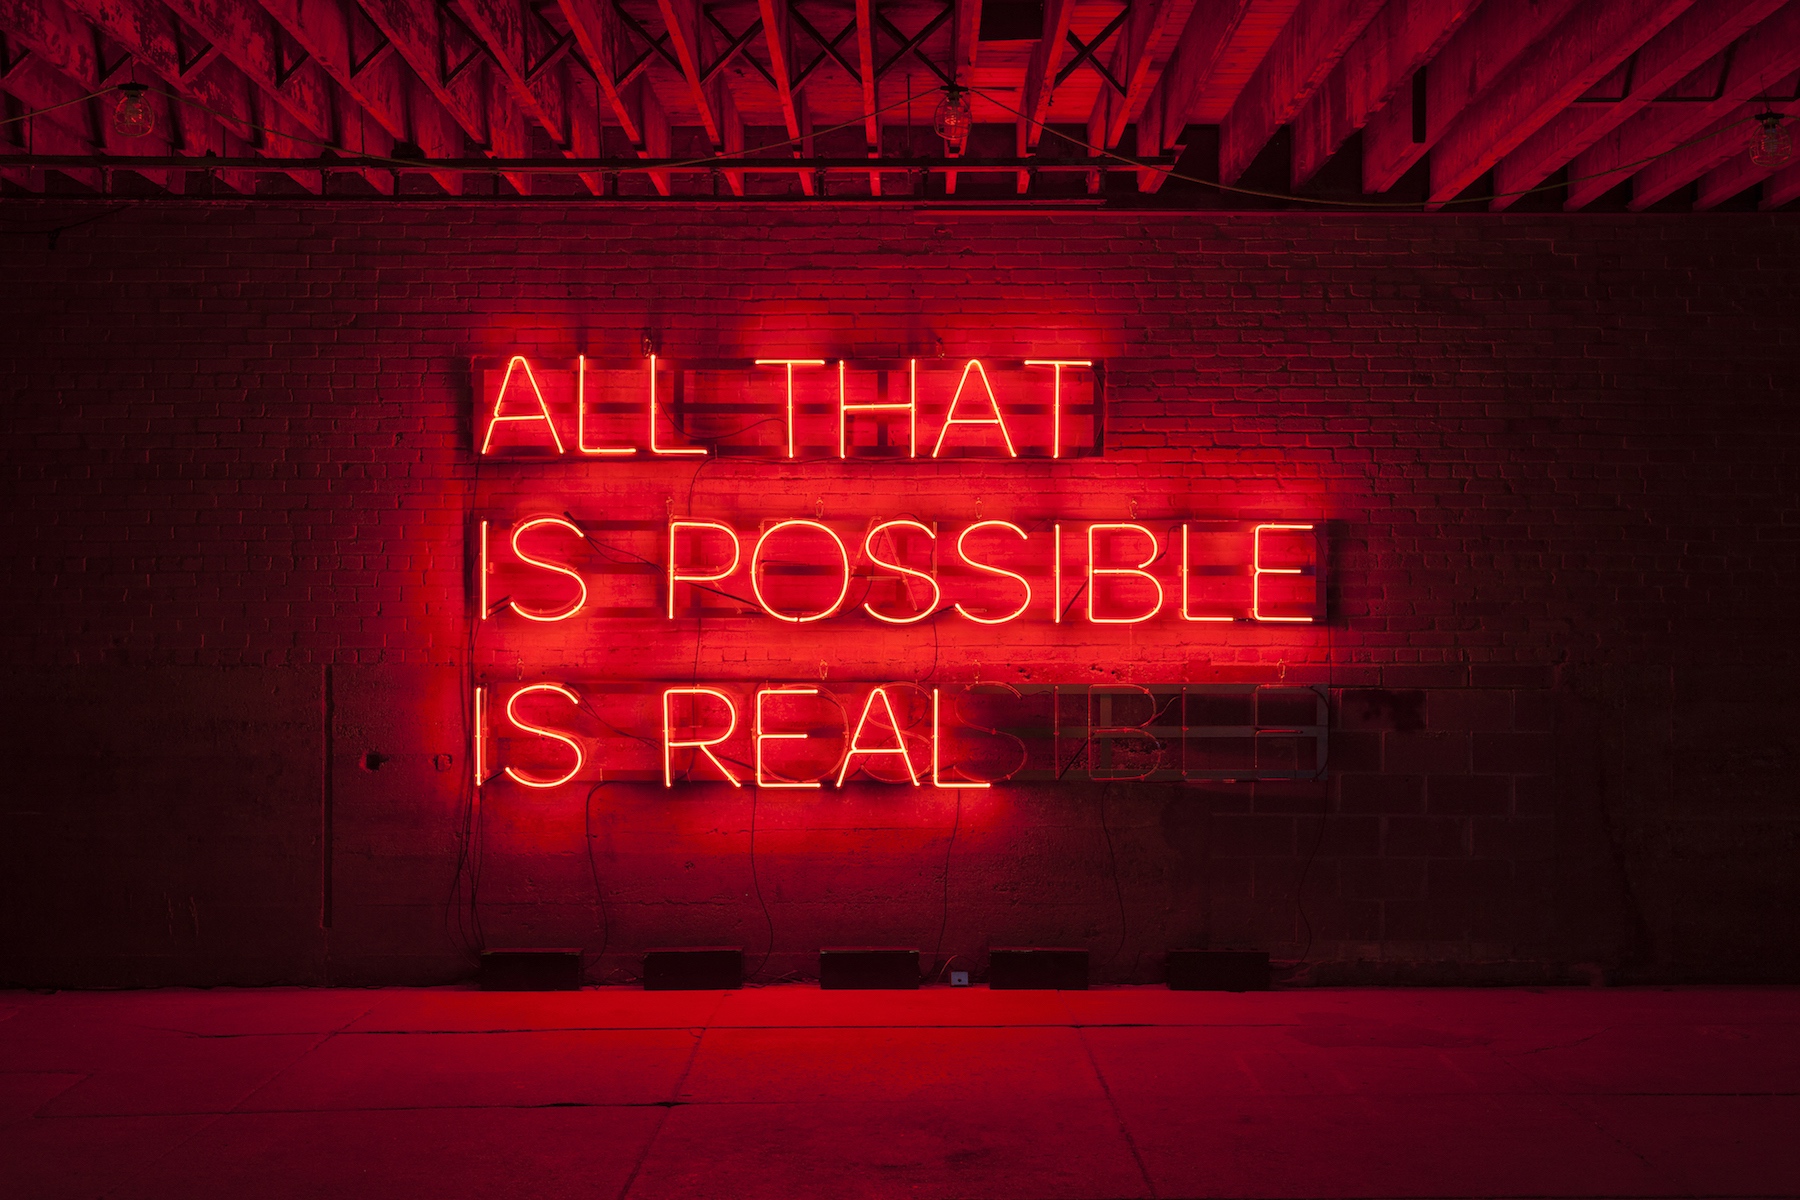 Alicia Eggert, All That Is Possible is Real, 2016-2017 neon, powder coated steel, custom controller 96” x 156” x 12”